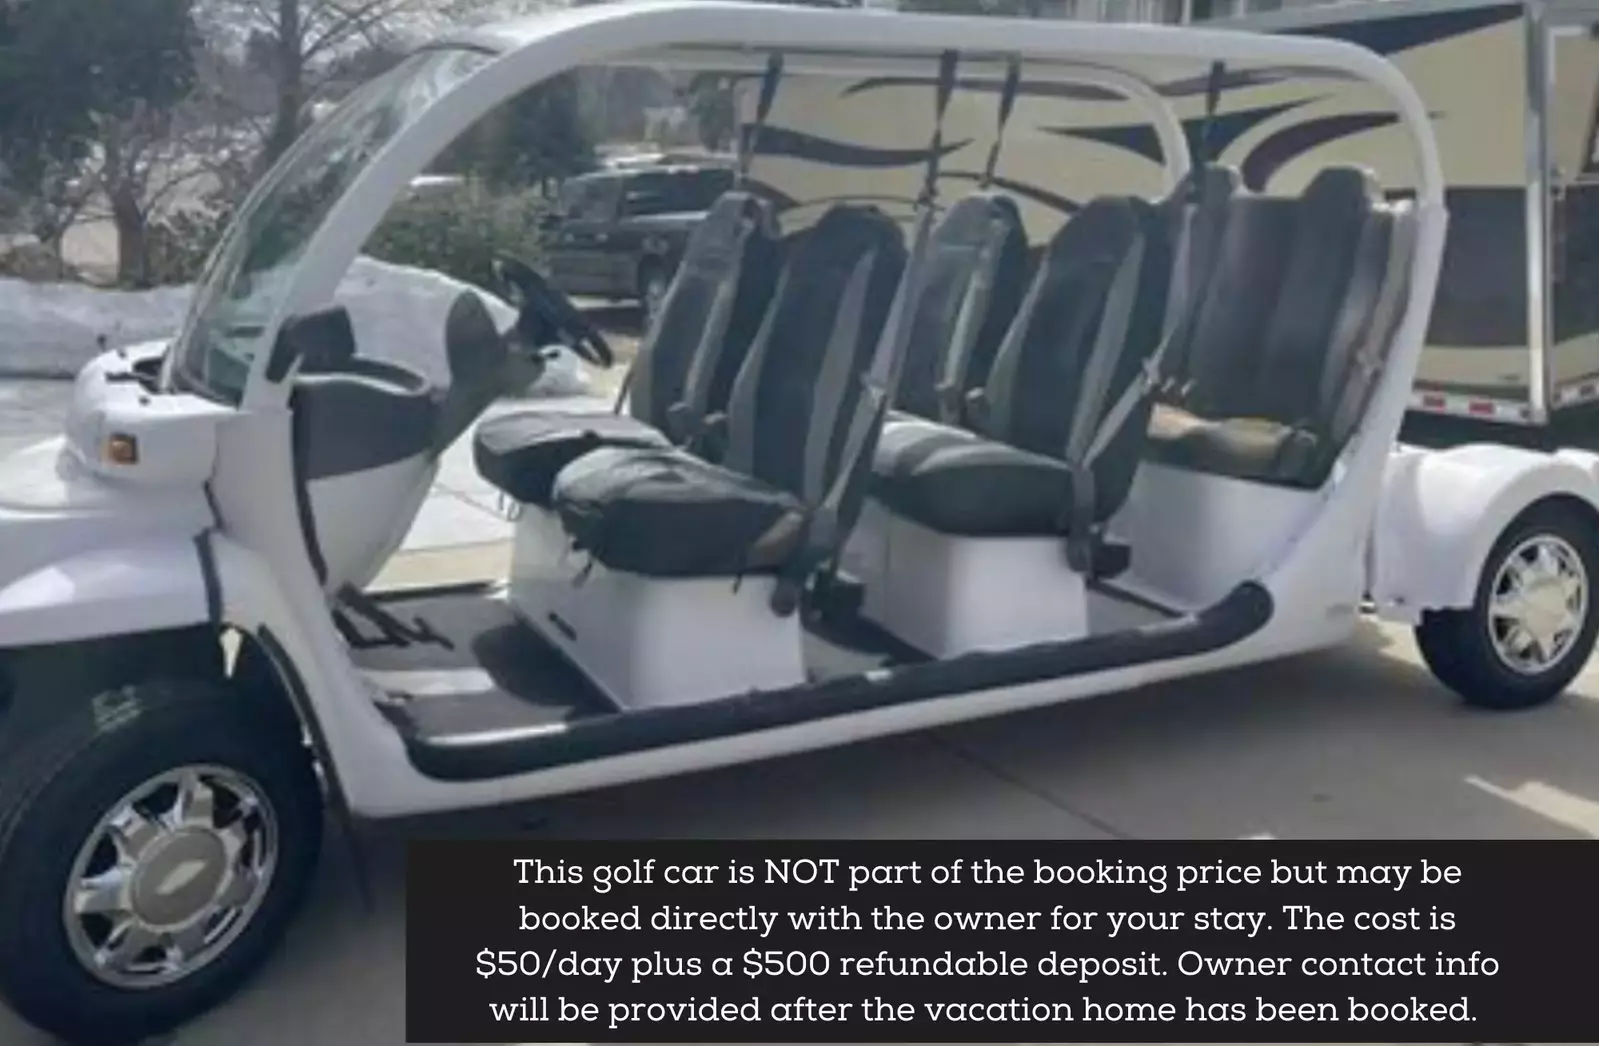 This golf car is NOT part of the booking price but may be booked directly with the owner for your stay. The cost is $100day plus a $500 refundable deposit. Owner contact will be provided after the booking is secu